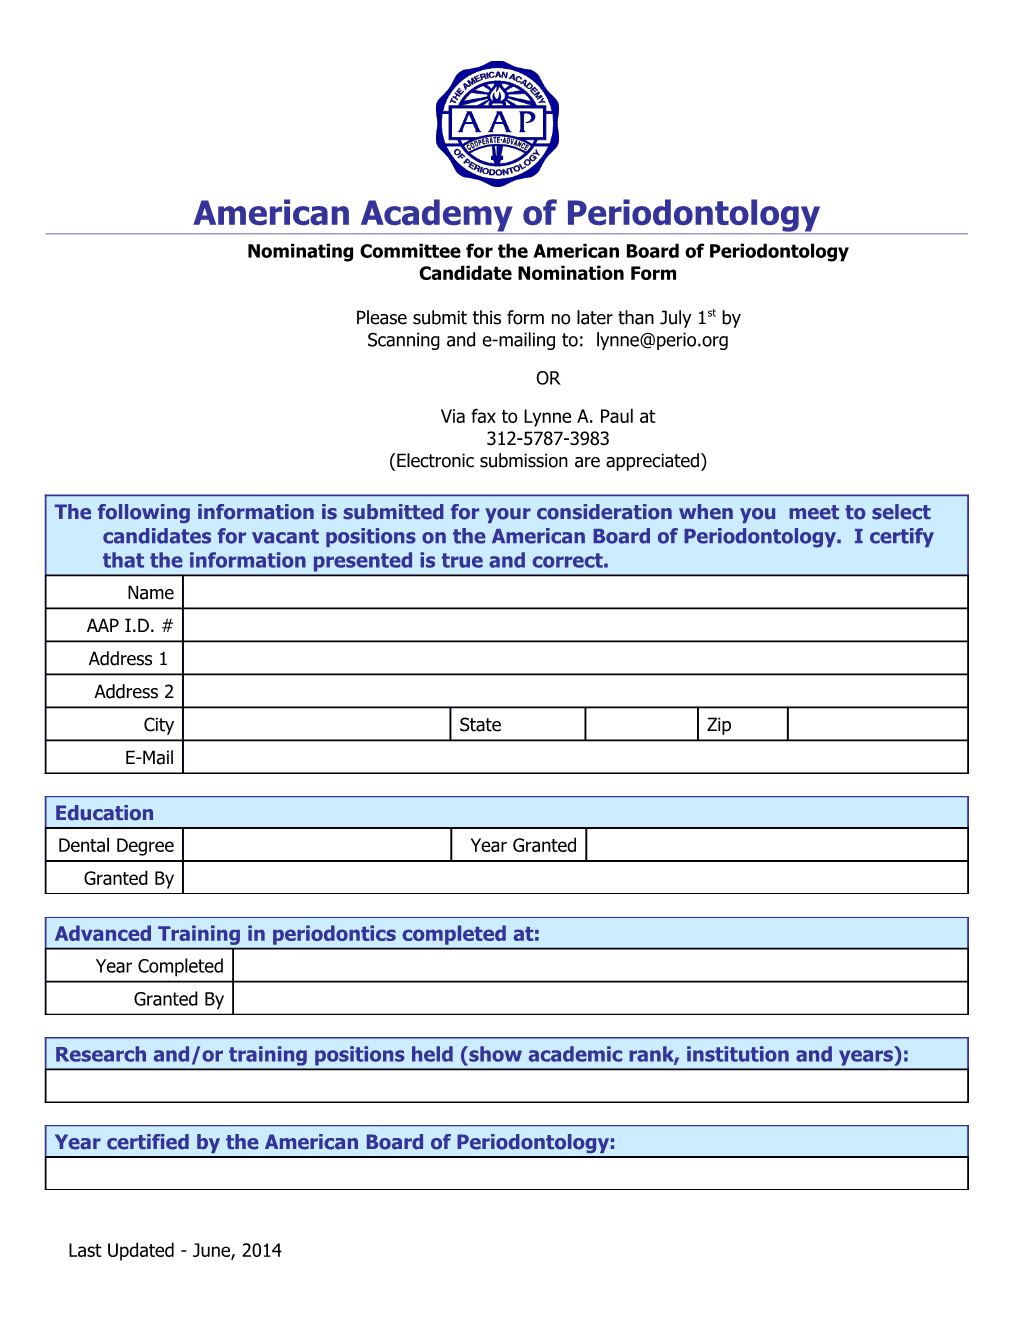 Nominating Committee for the American Board of Periodontology